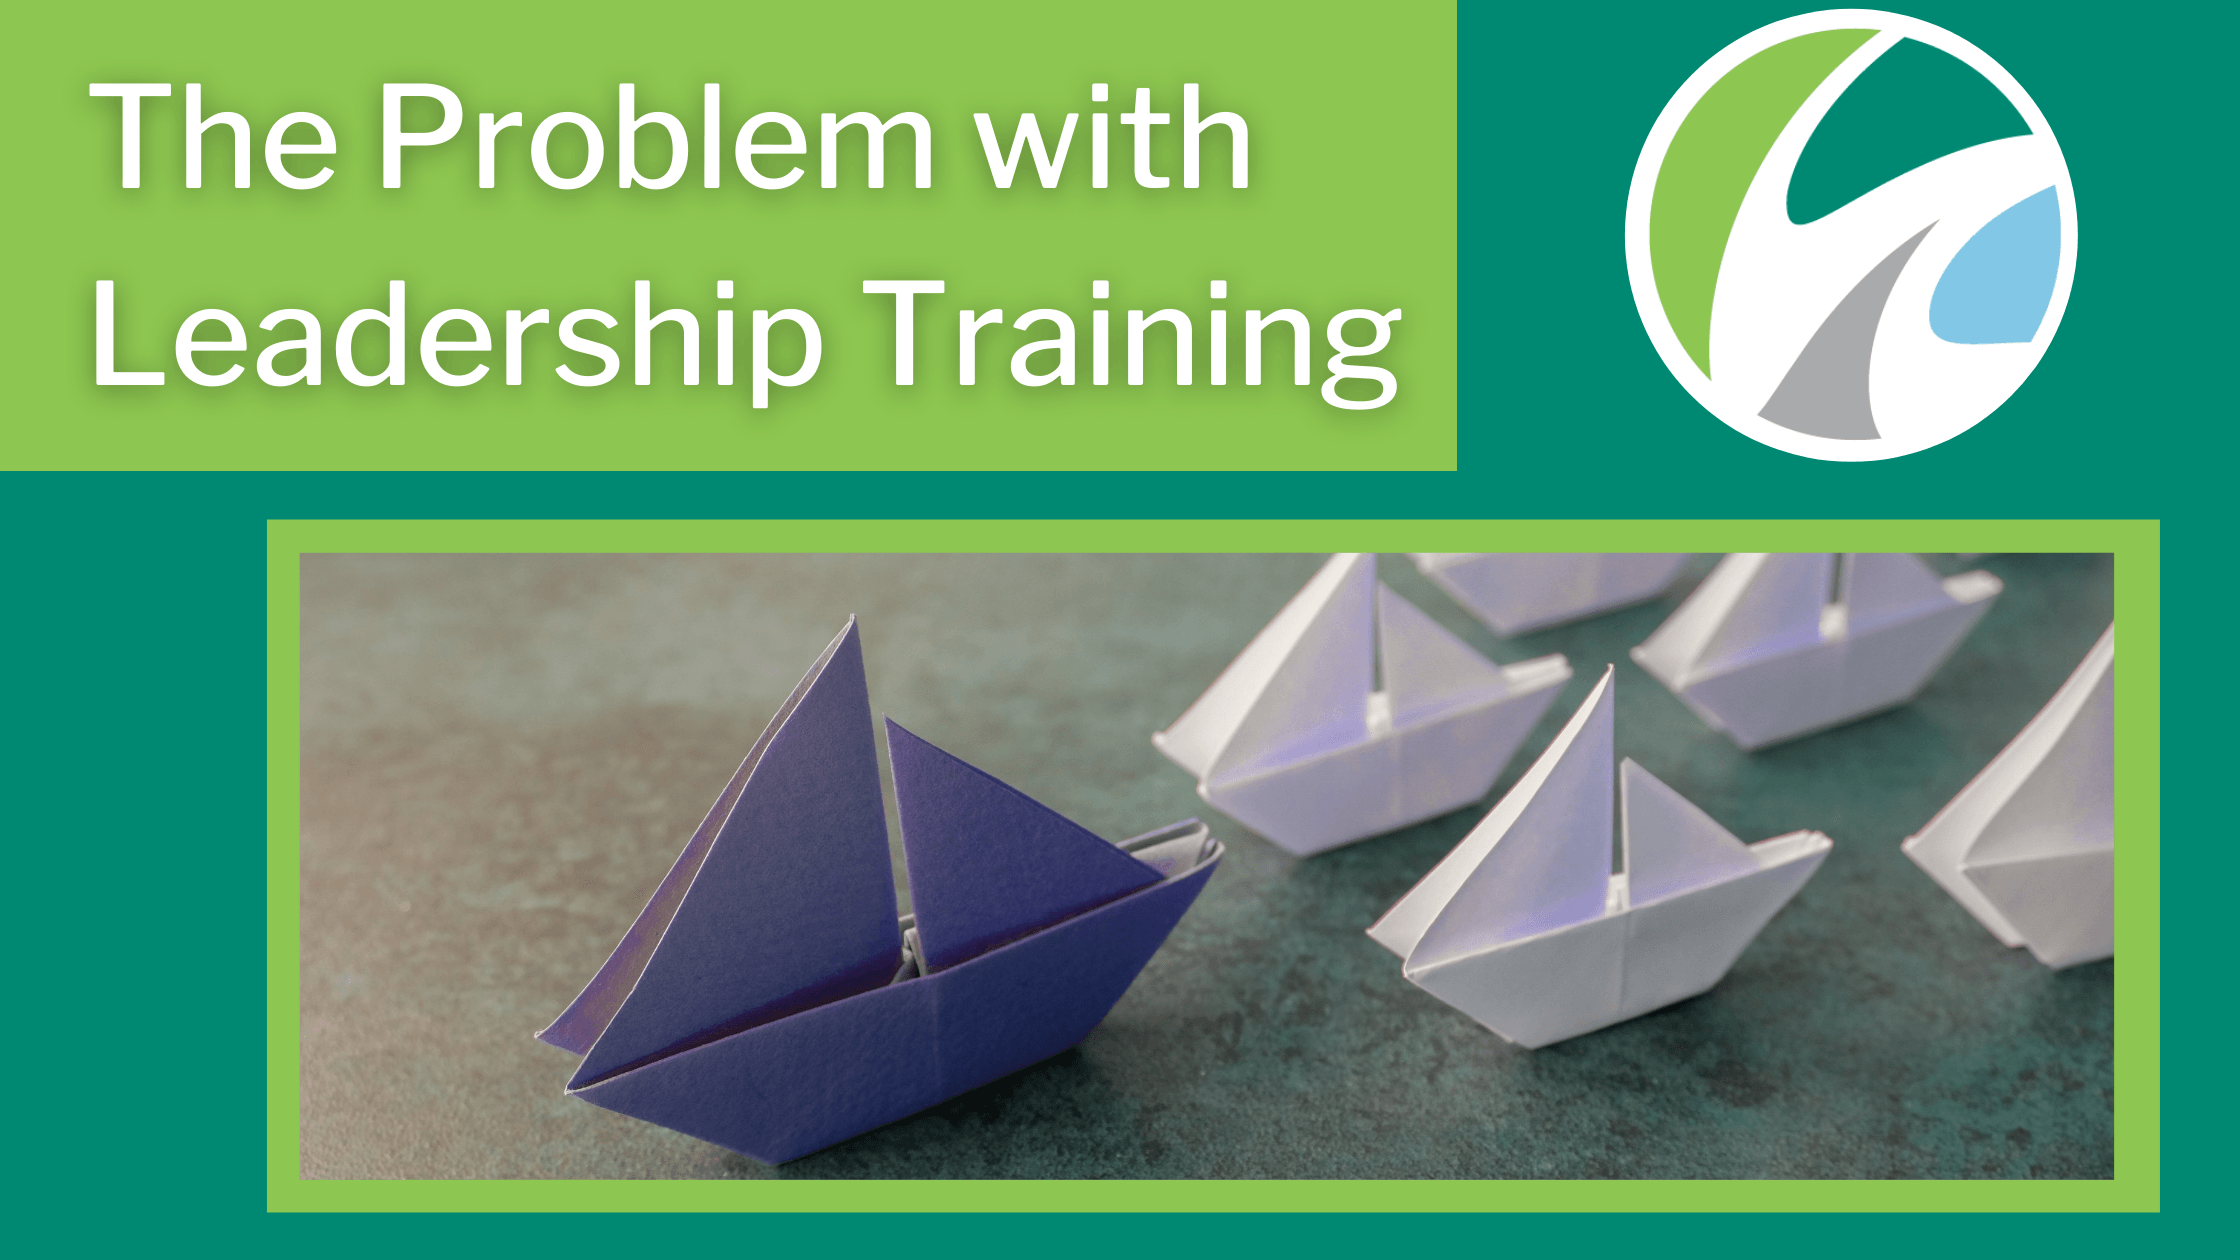 Leadership Training: the Problem isn’t “What,” it’s “Who”